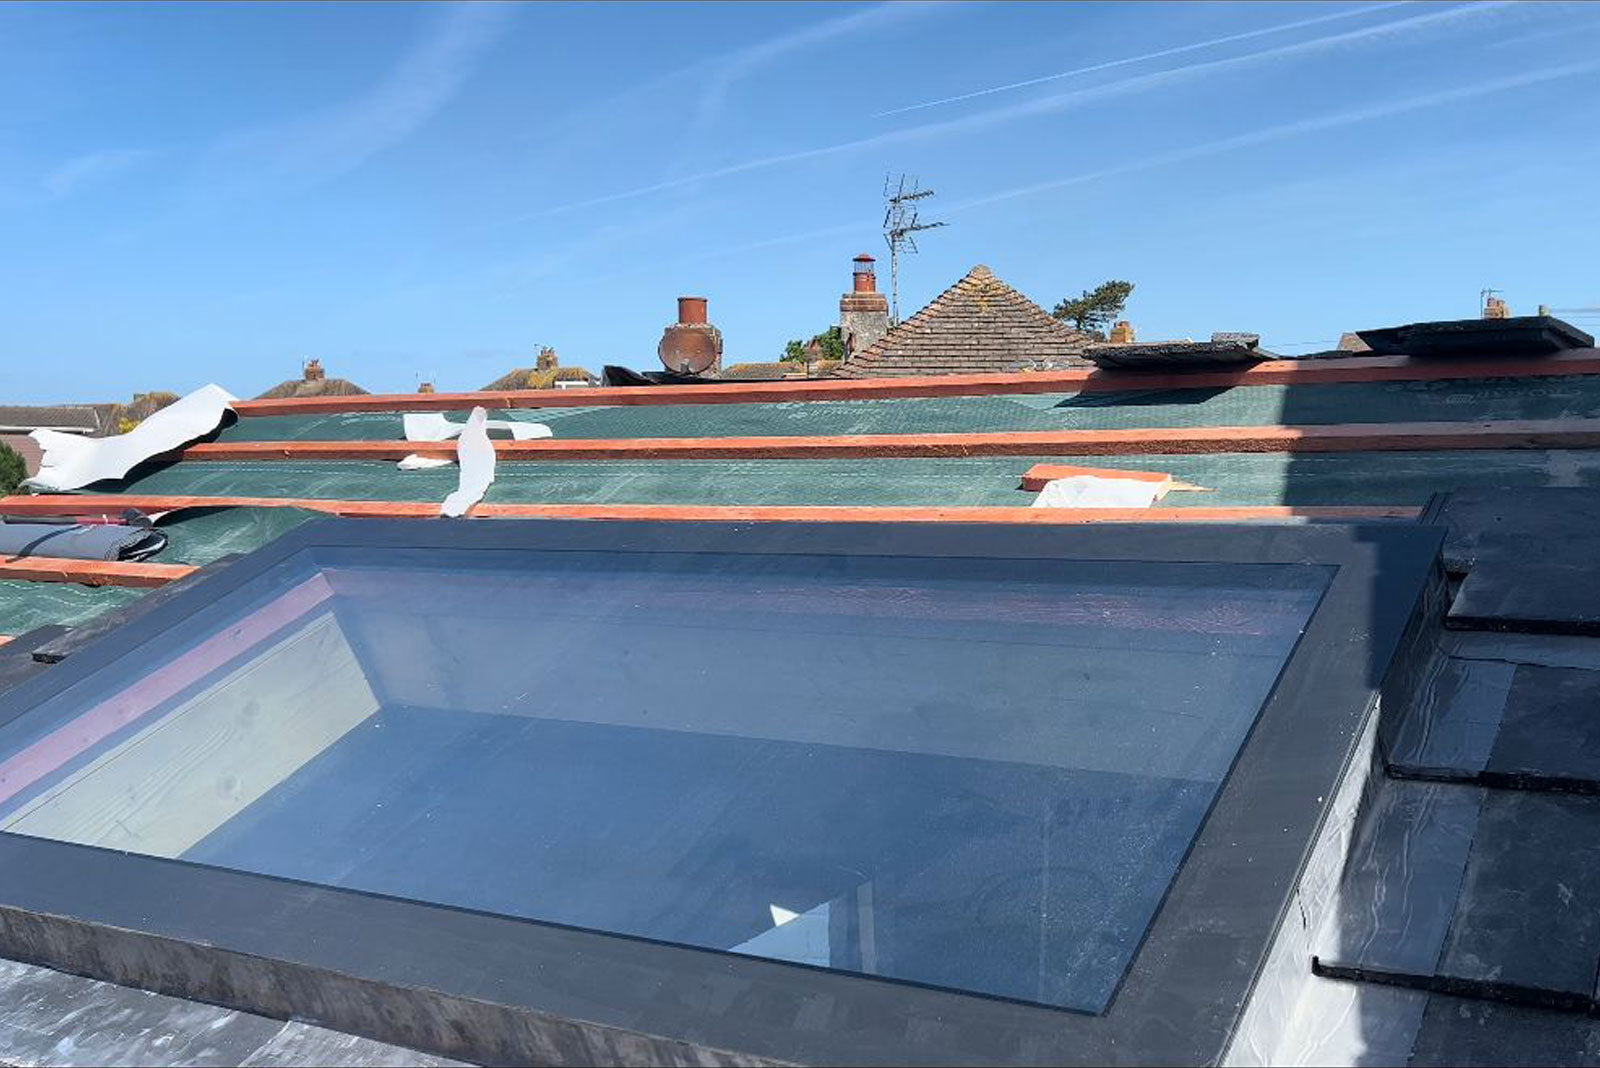 Pitched Roof Skylight 1500 x 2500mm